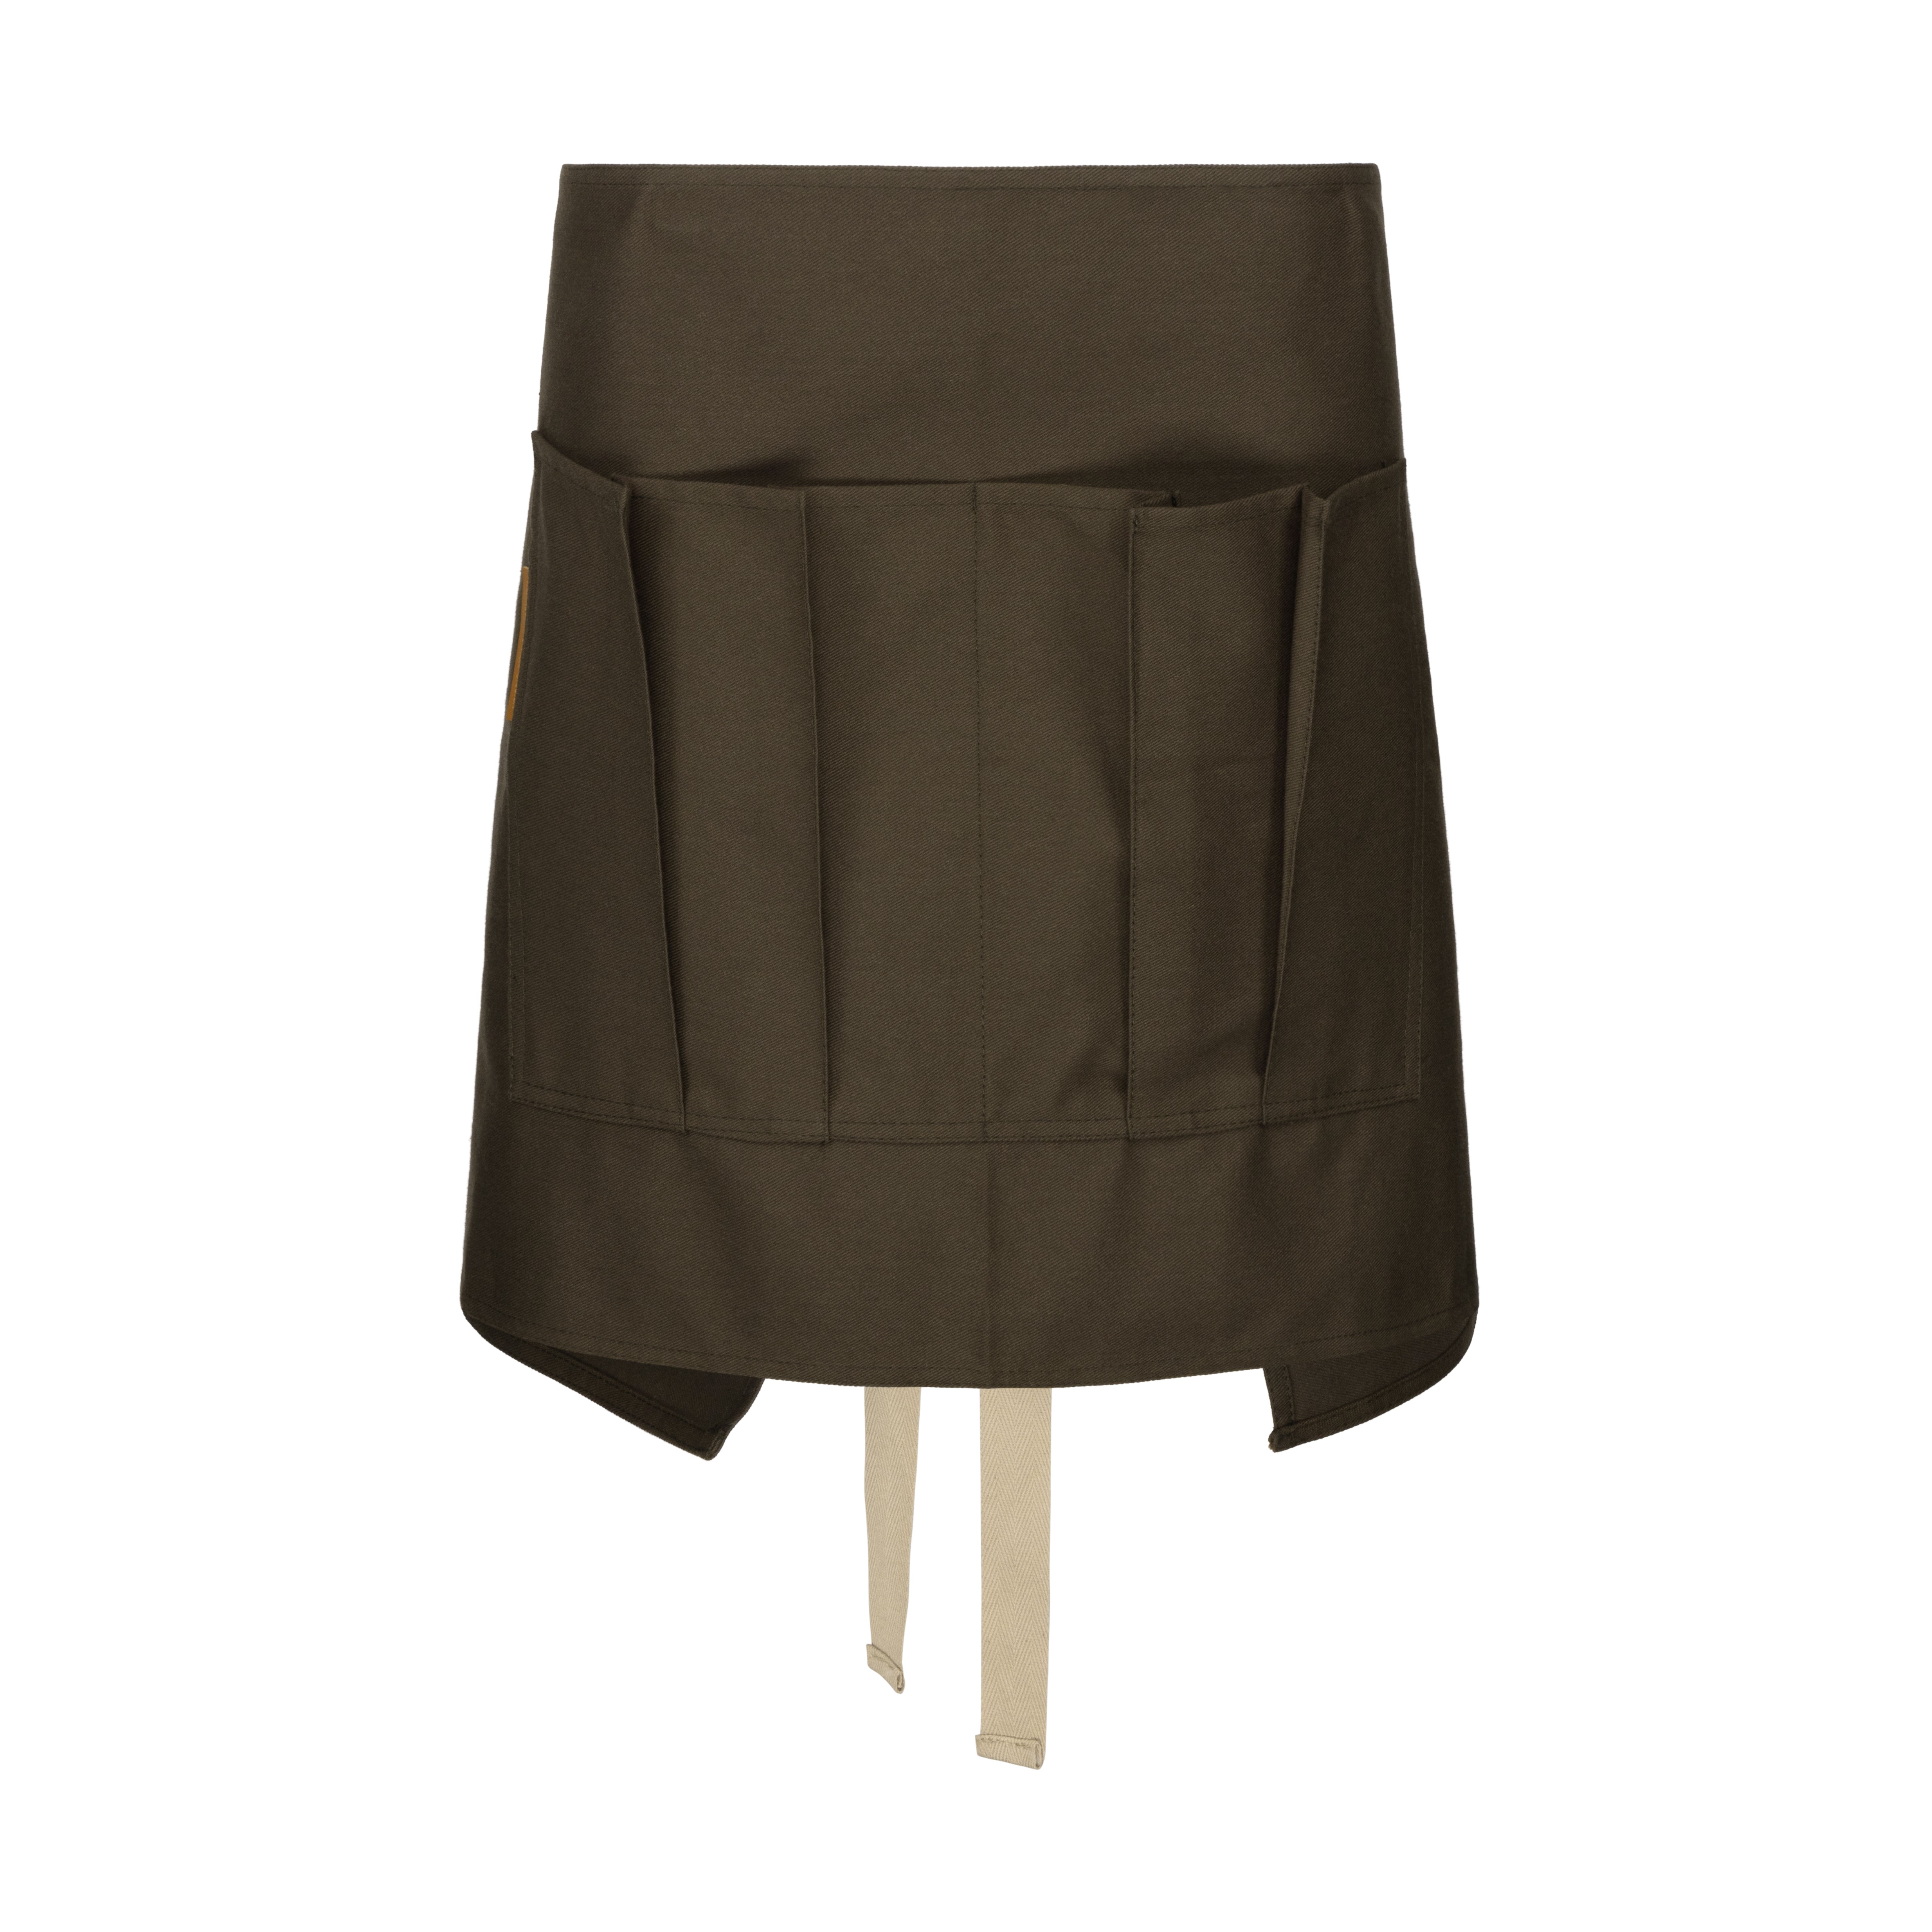 Carrier Company Gardeners Half Apron in Olive